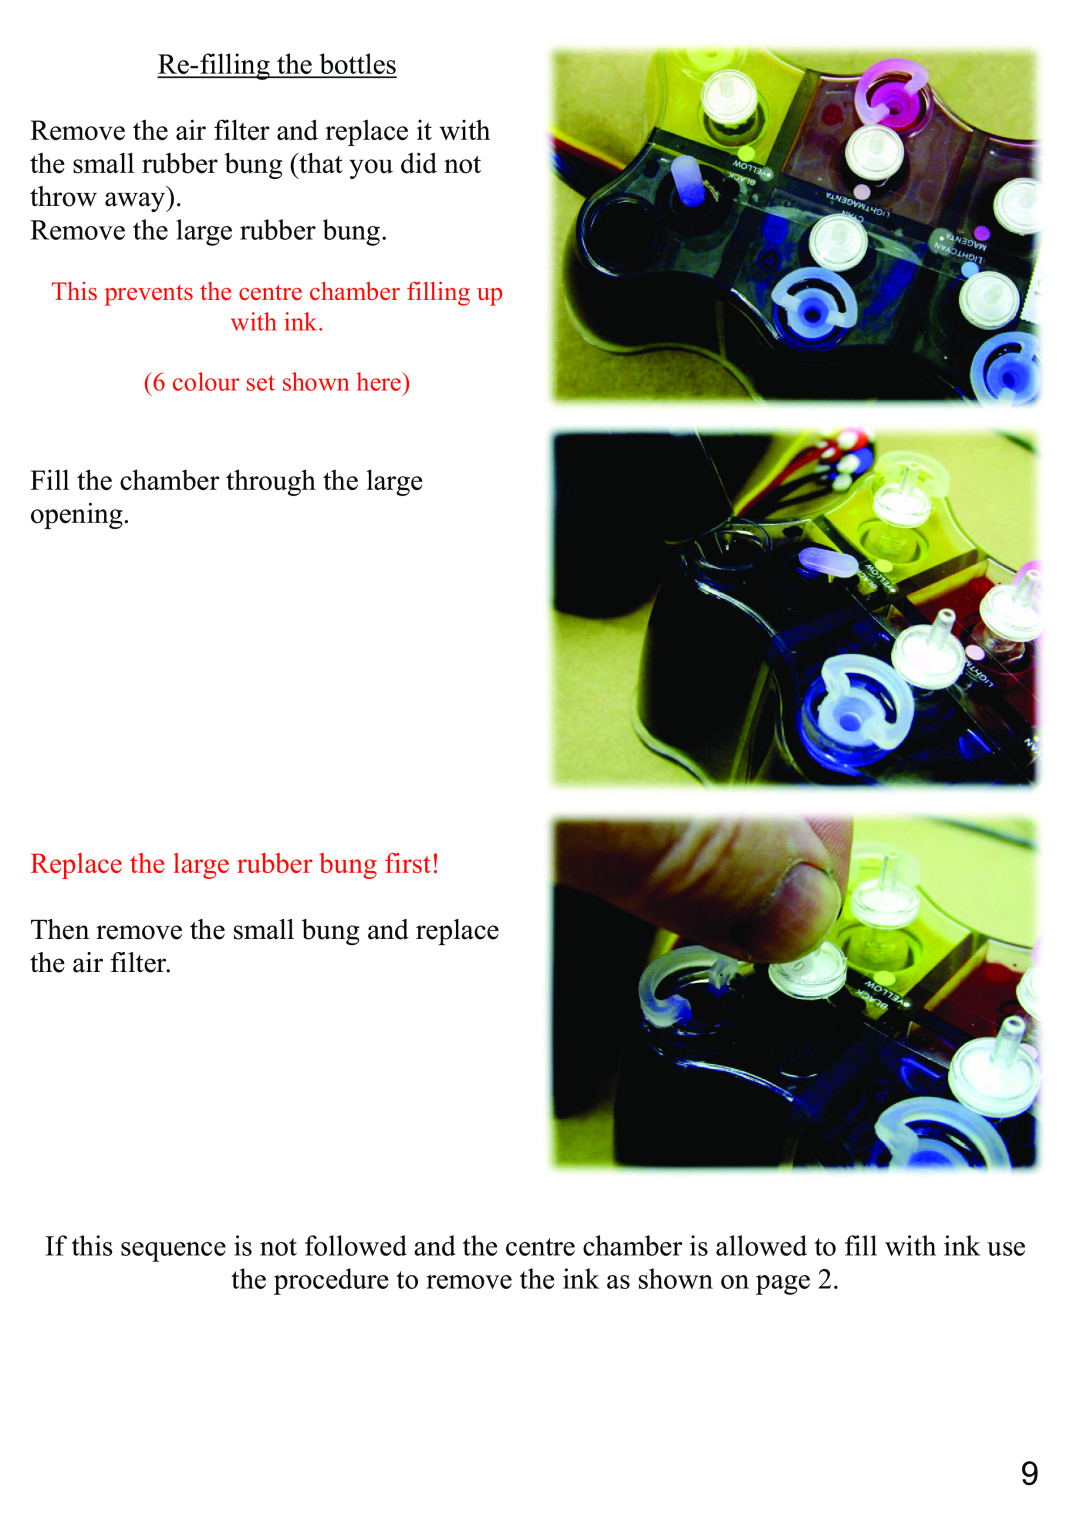 Epson D88 instruction manual Re-filling the bottles, Replace the large rubber bung first 